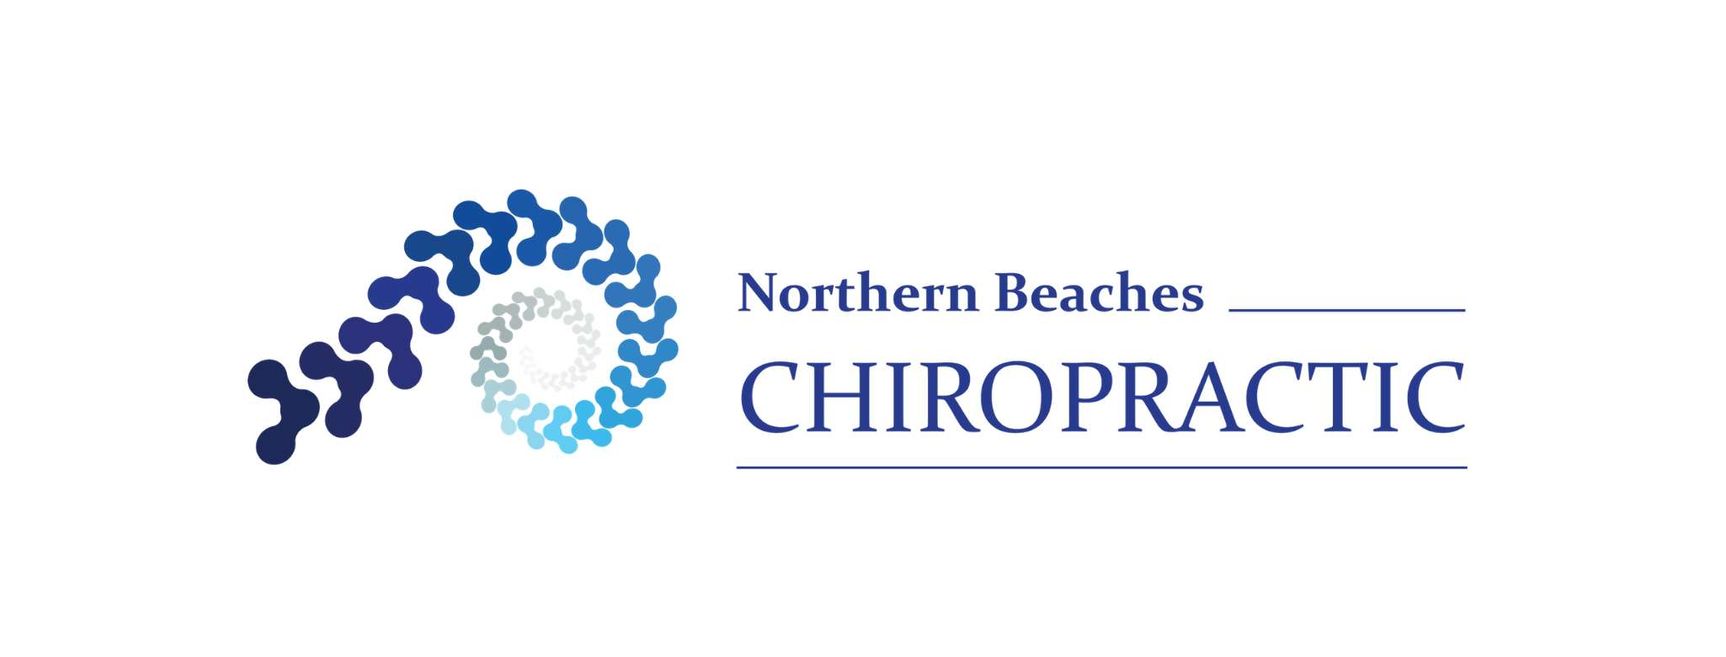 Northern Beaches Chiropractic featured image